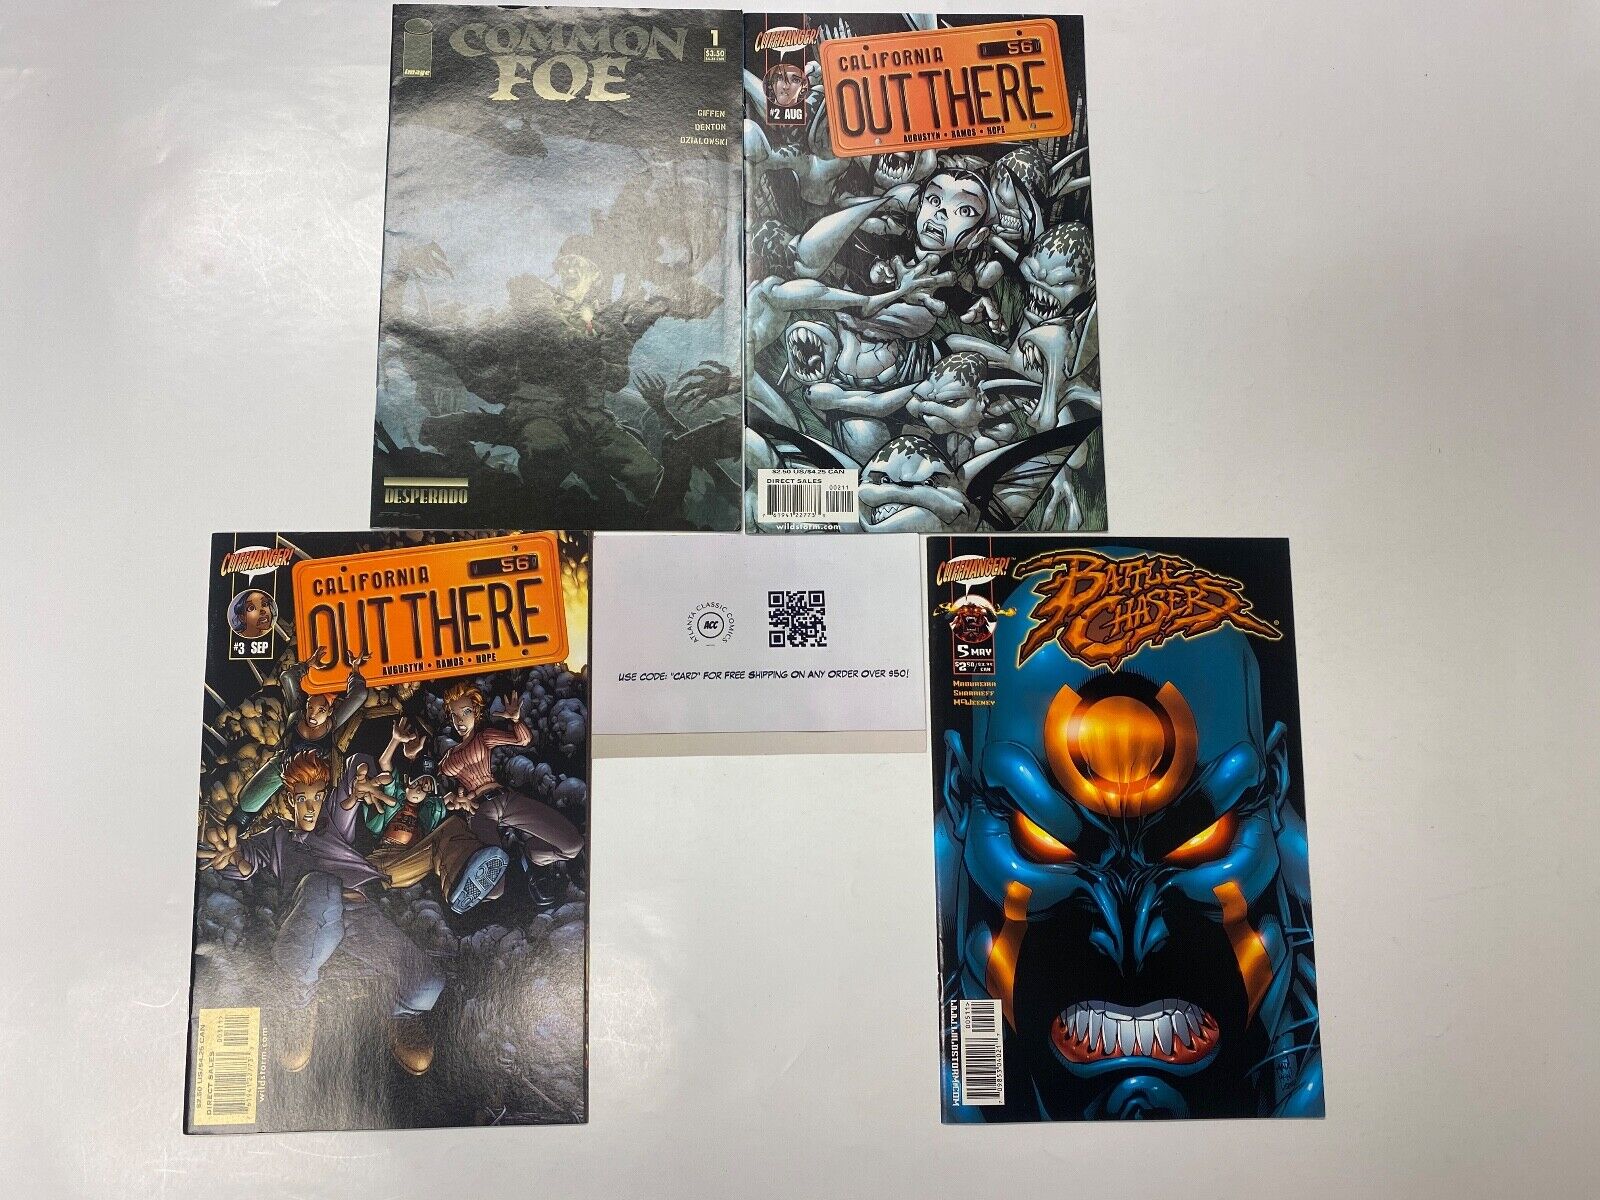 4 WILDSTORM comic books Common Foe #1 Out There #2 3 Battle Chasers #5 14 KM7